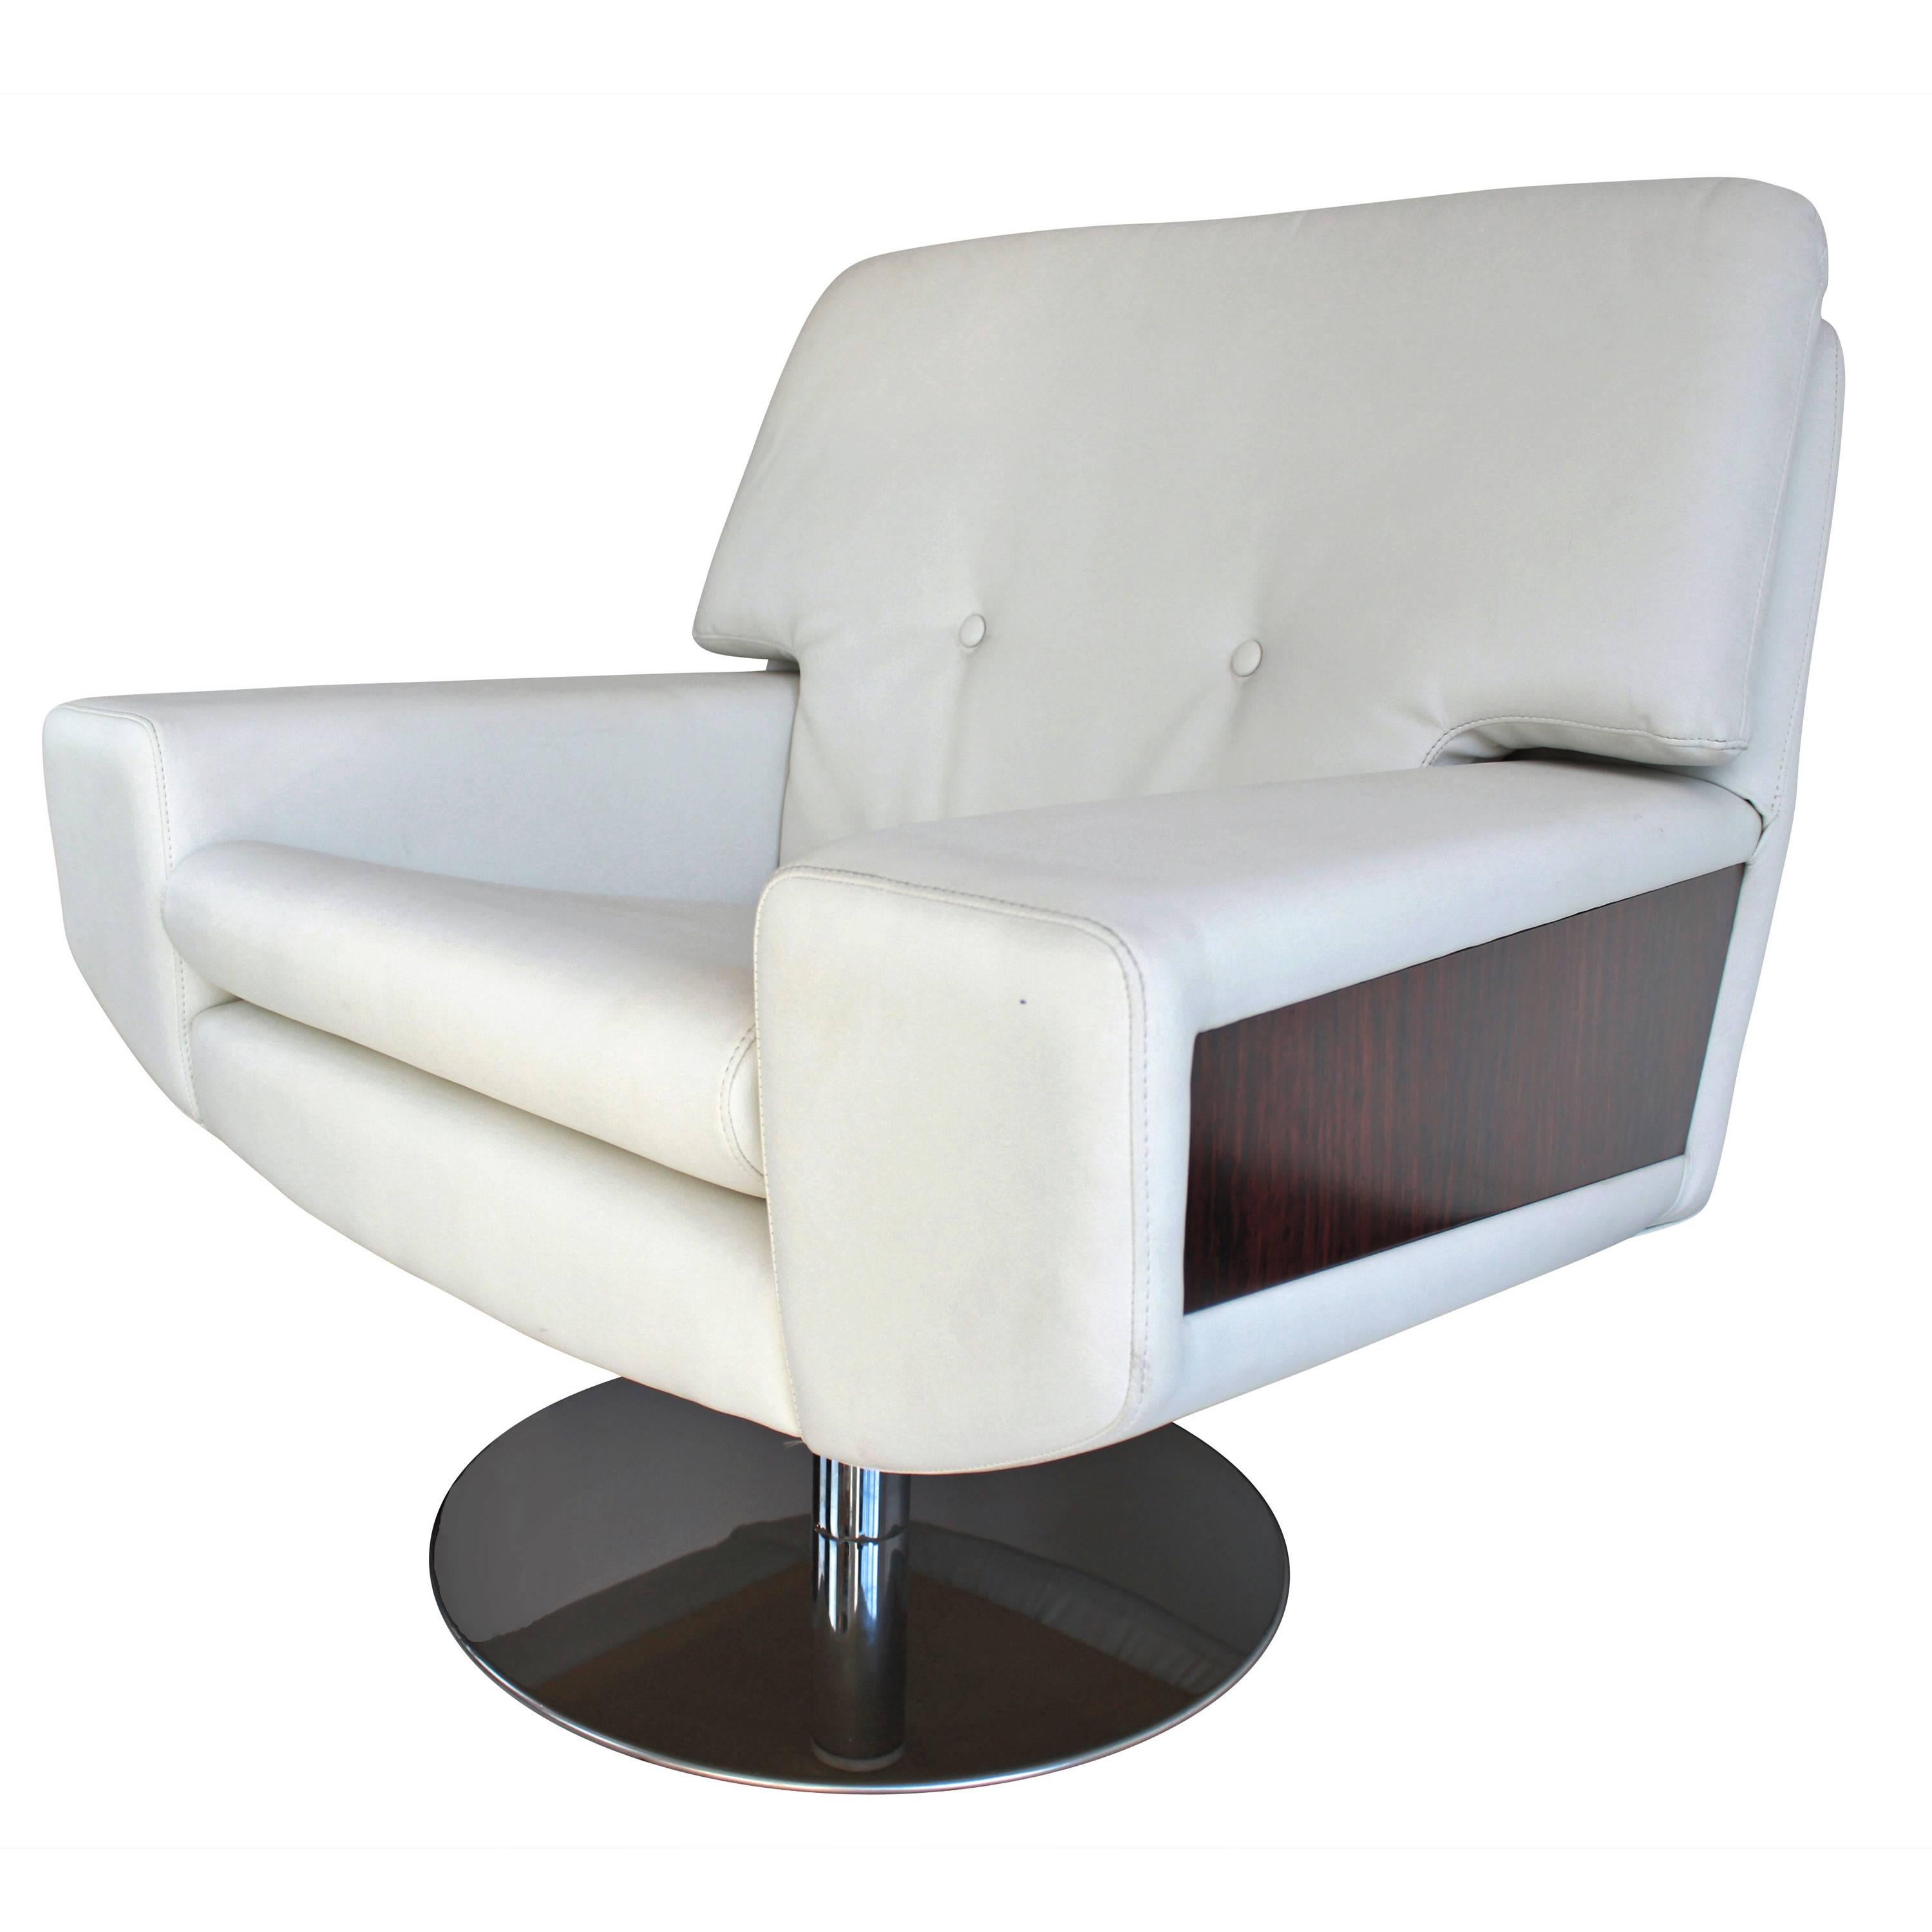 Large pair of lounge armchairs in white skai leather upholstery, partially padded. Sides in Wood. Chrome base.
Italy, 1970s.

More images available upon request.